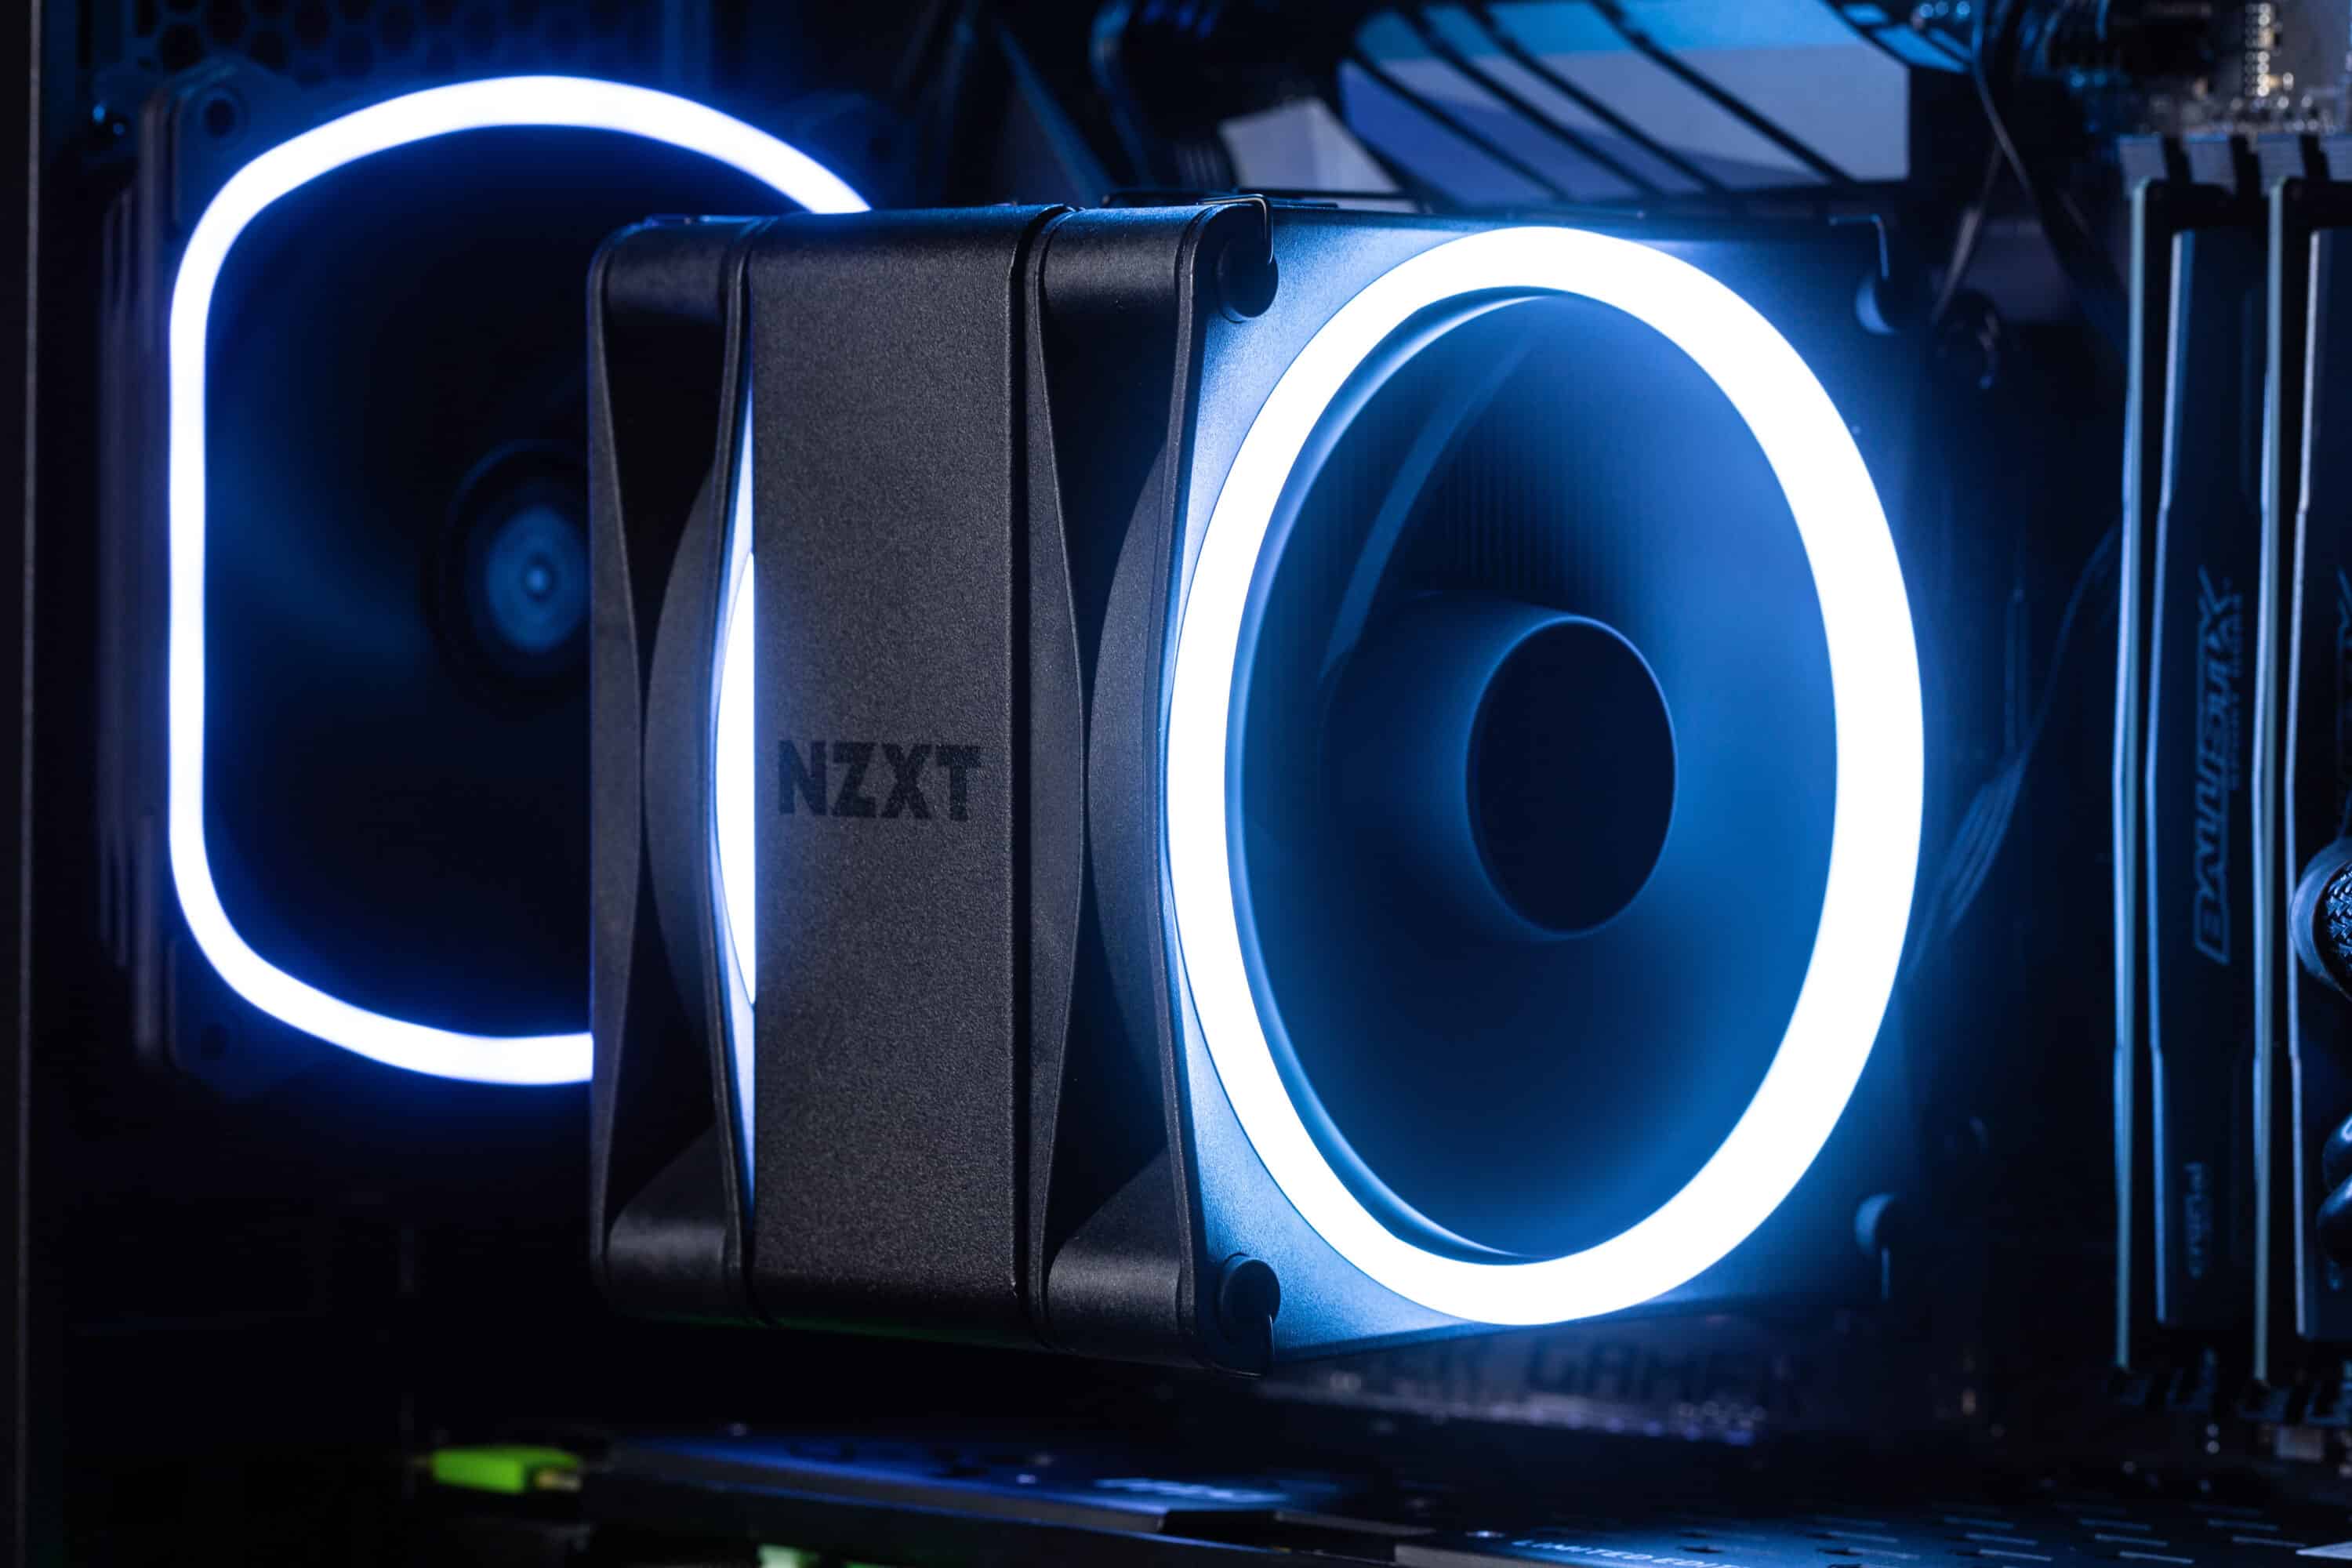 NZXT T120 RGB in review - yes, this is an air cooler!